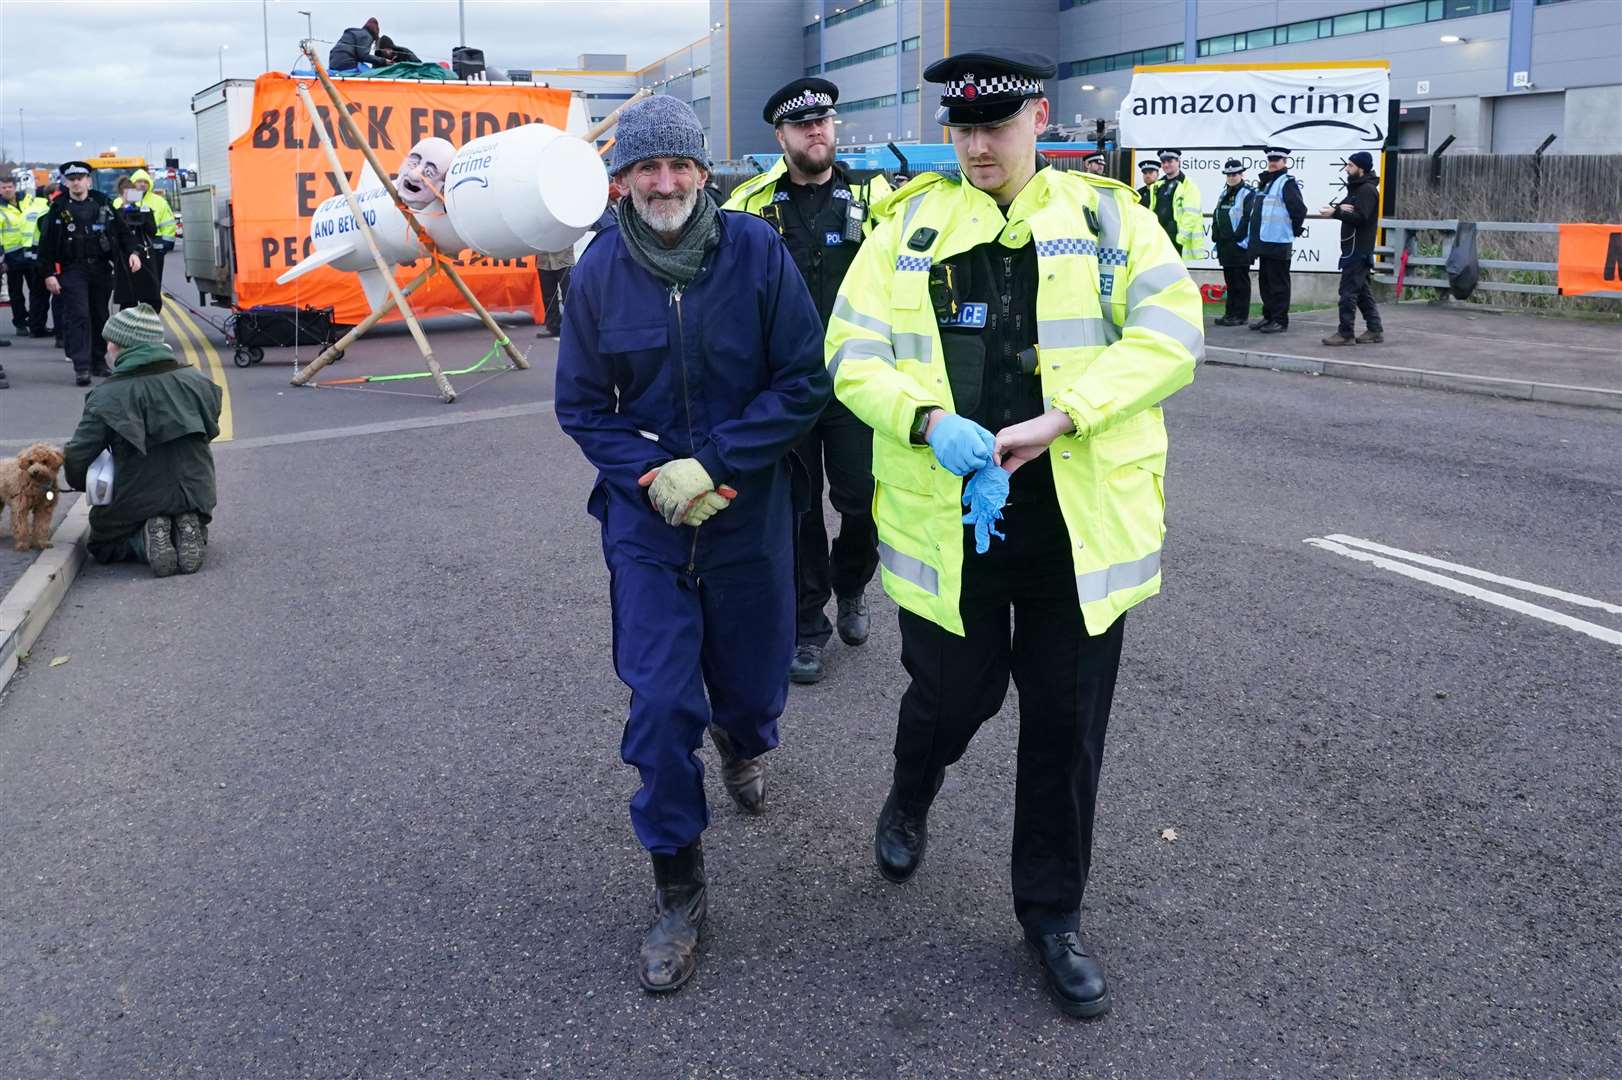 An activist from Extinction Rebellion is led away by police as they block the entrance to the Amazon fulfilment centre in Tilbury, Essex (Ian West/PA)